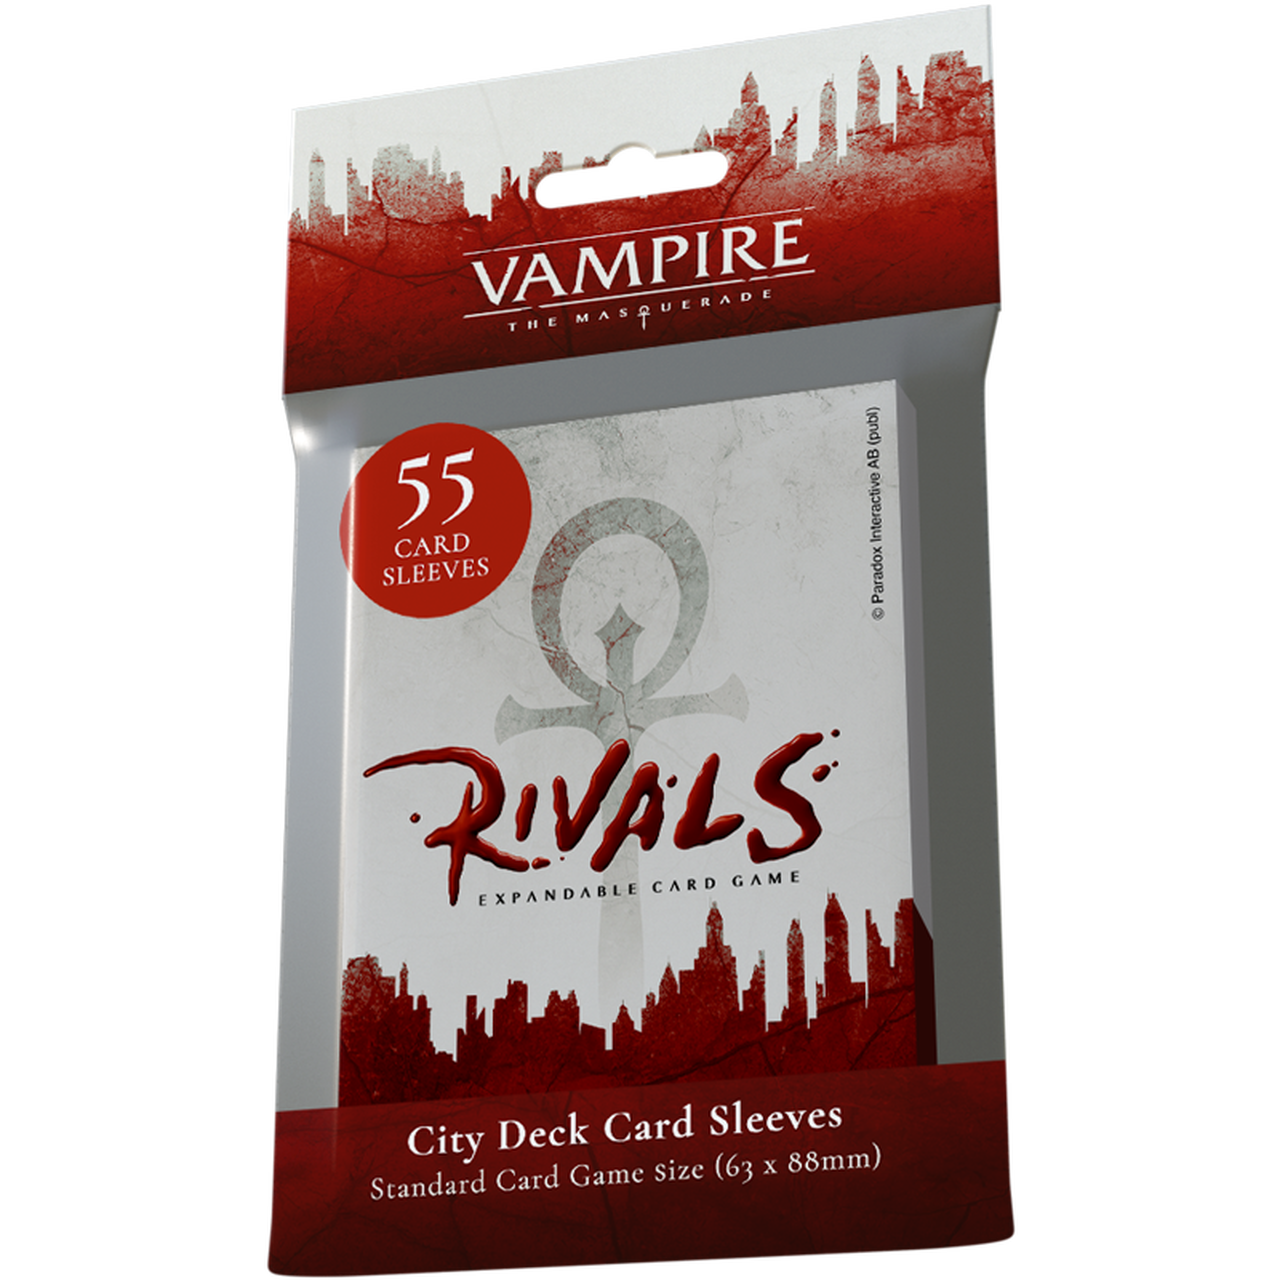 Vampire The Masquerade - Rivals Expandable Card Game